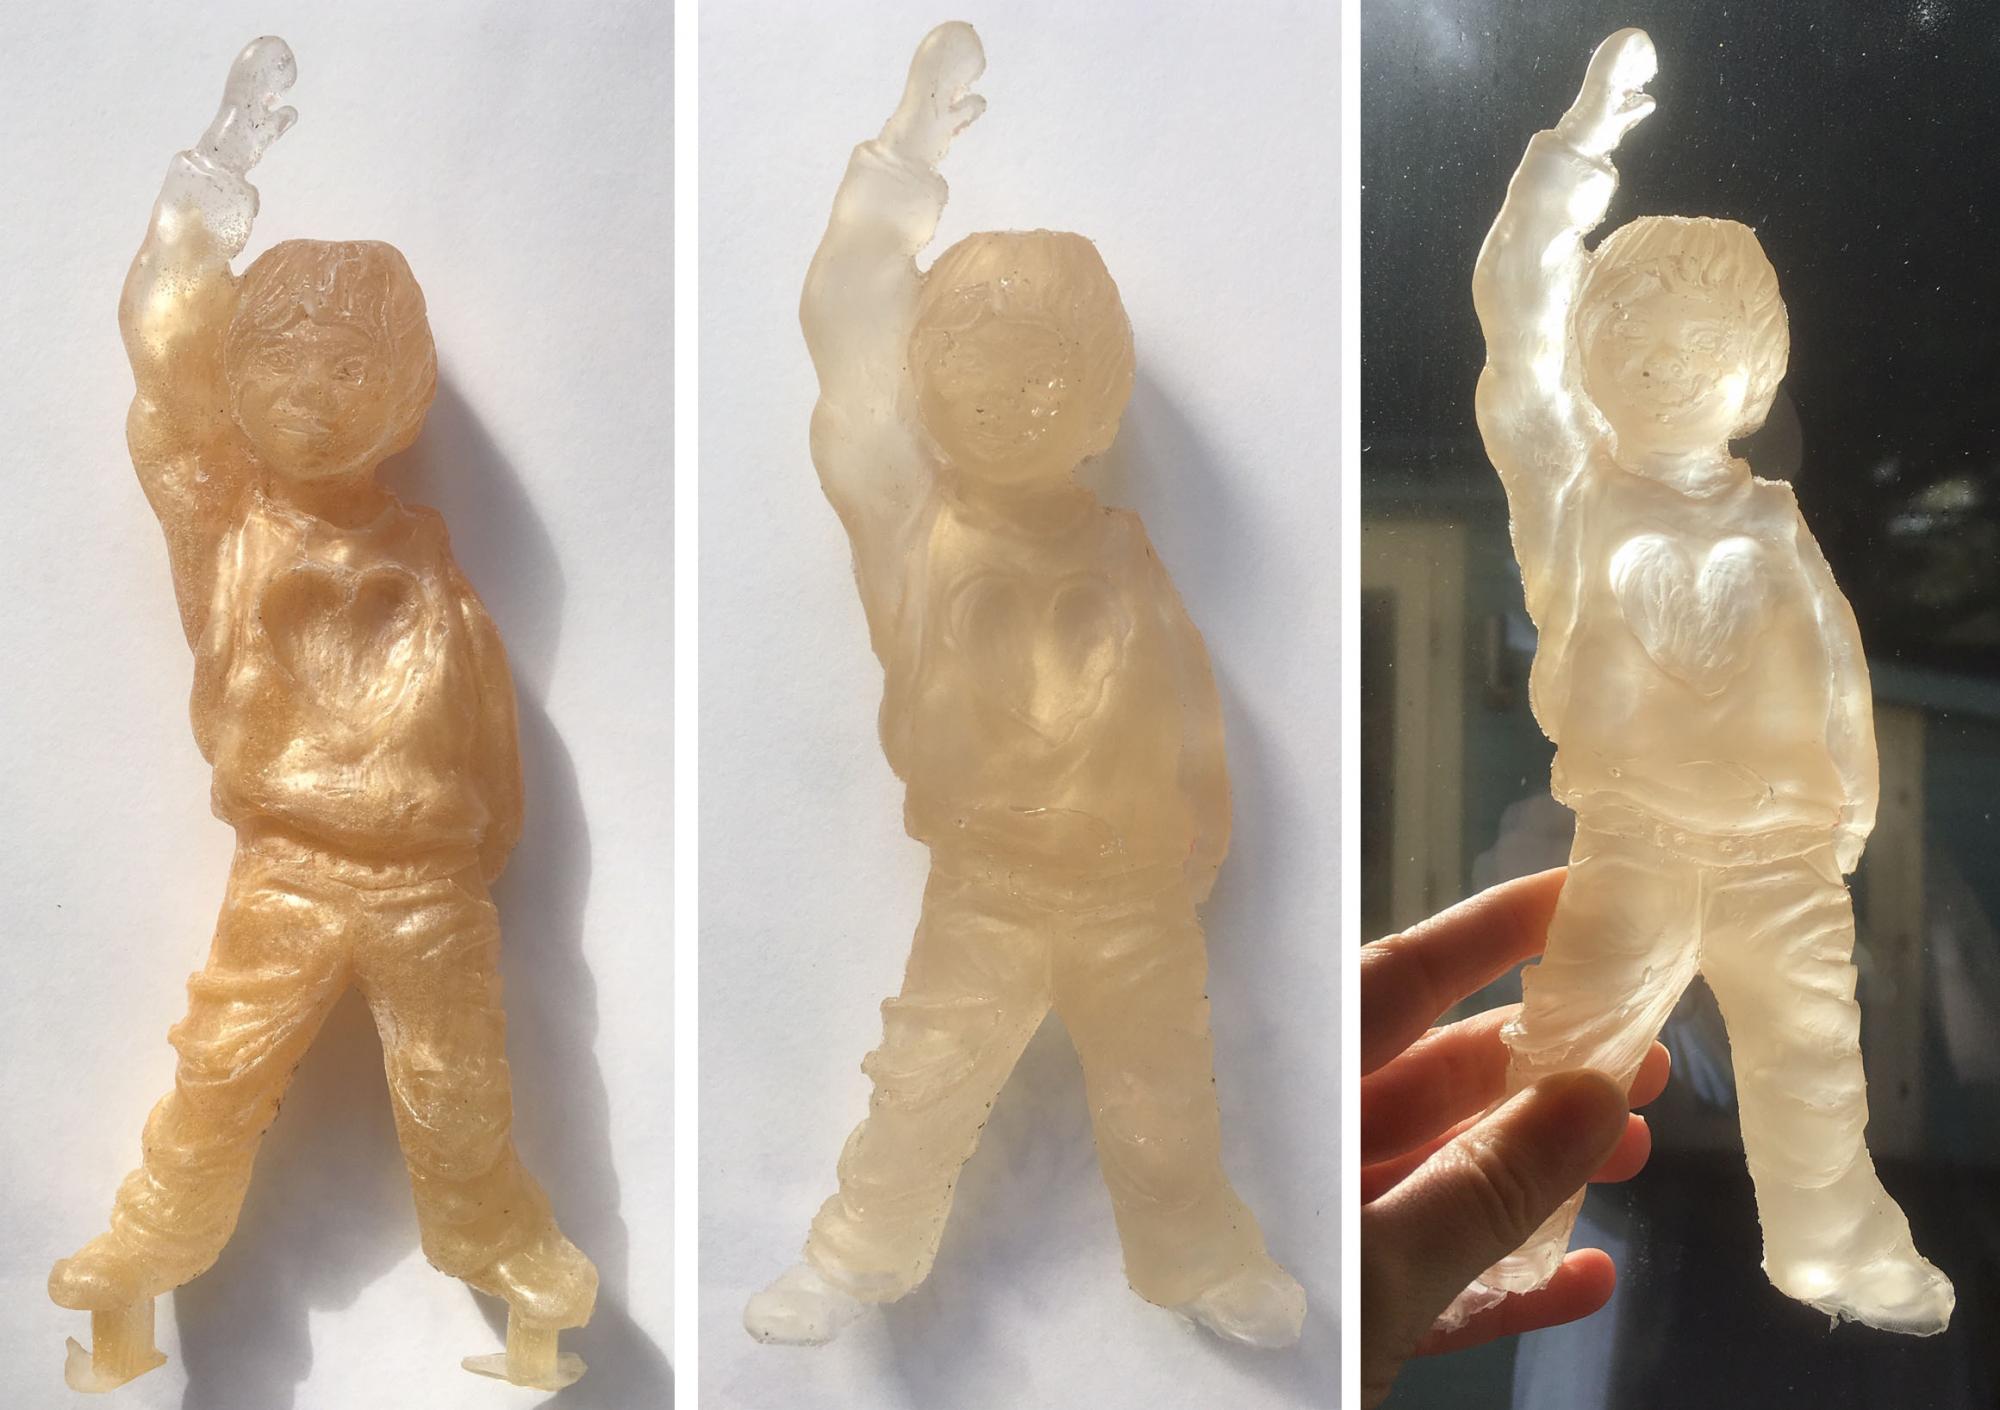 Resin figures. Image credit: Fiona McTaggart